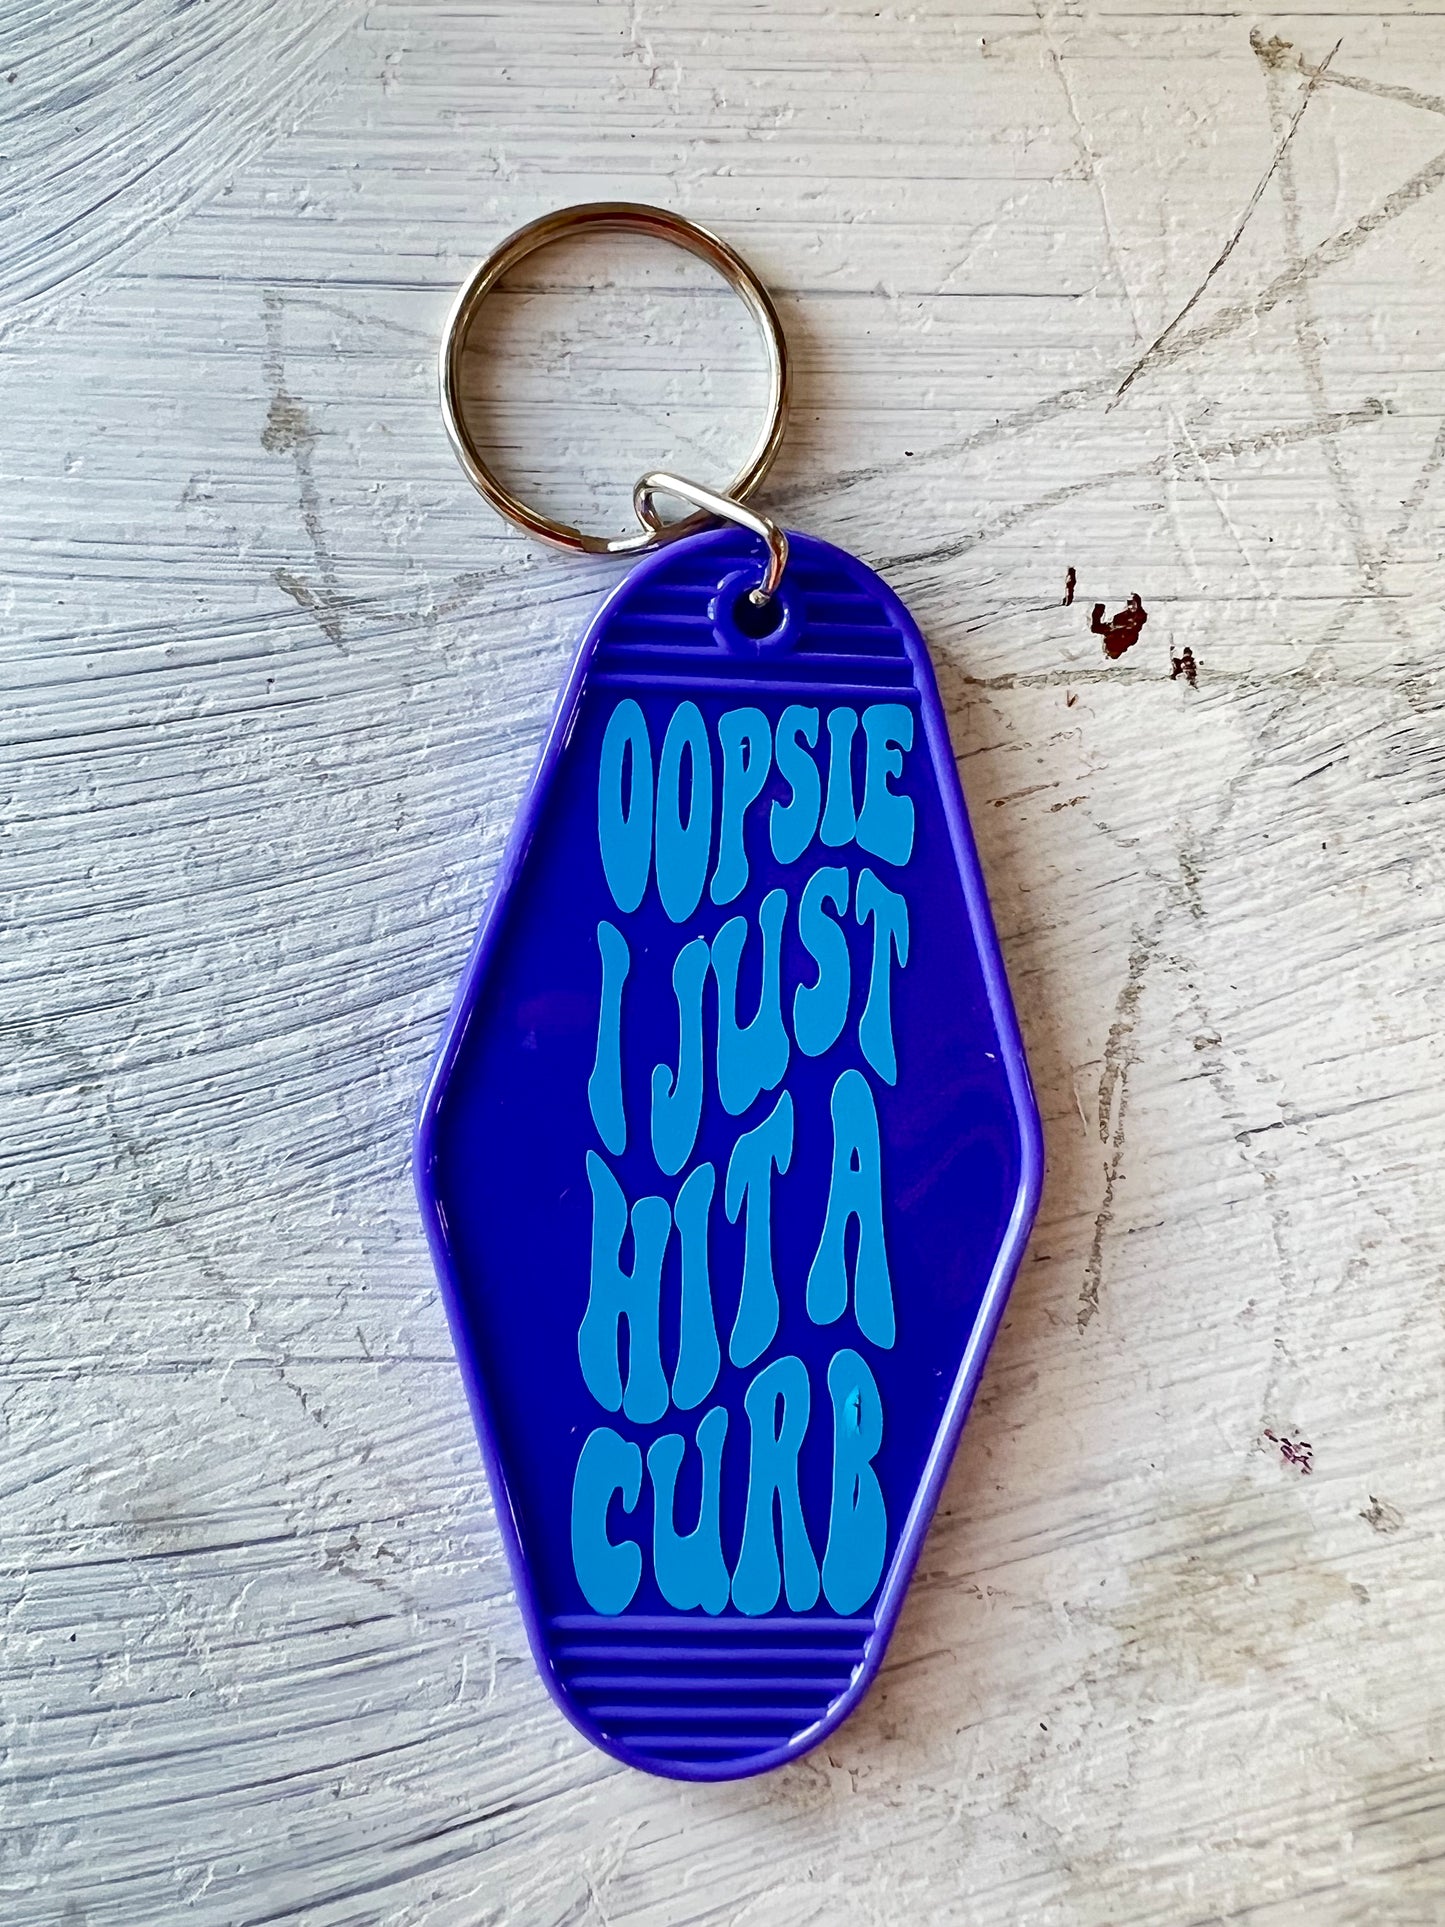 "Oopsie I Just Hit A Curb" Hotel Keychain